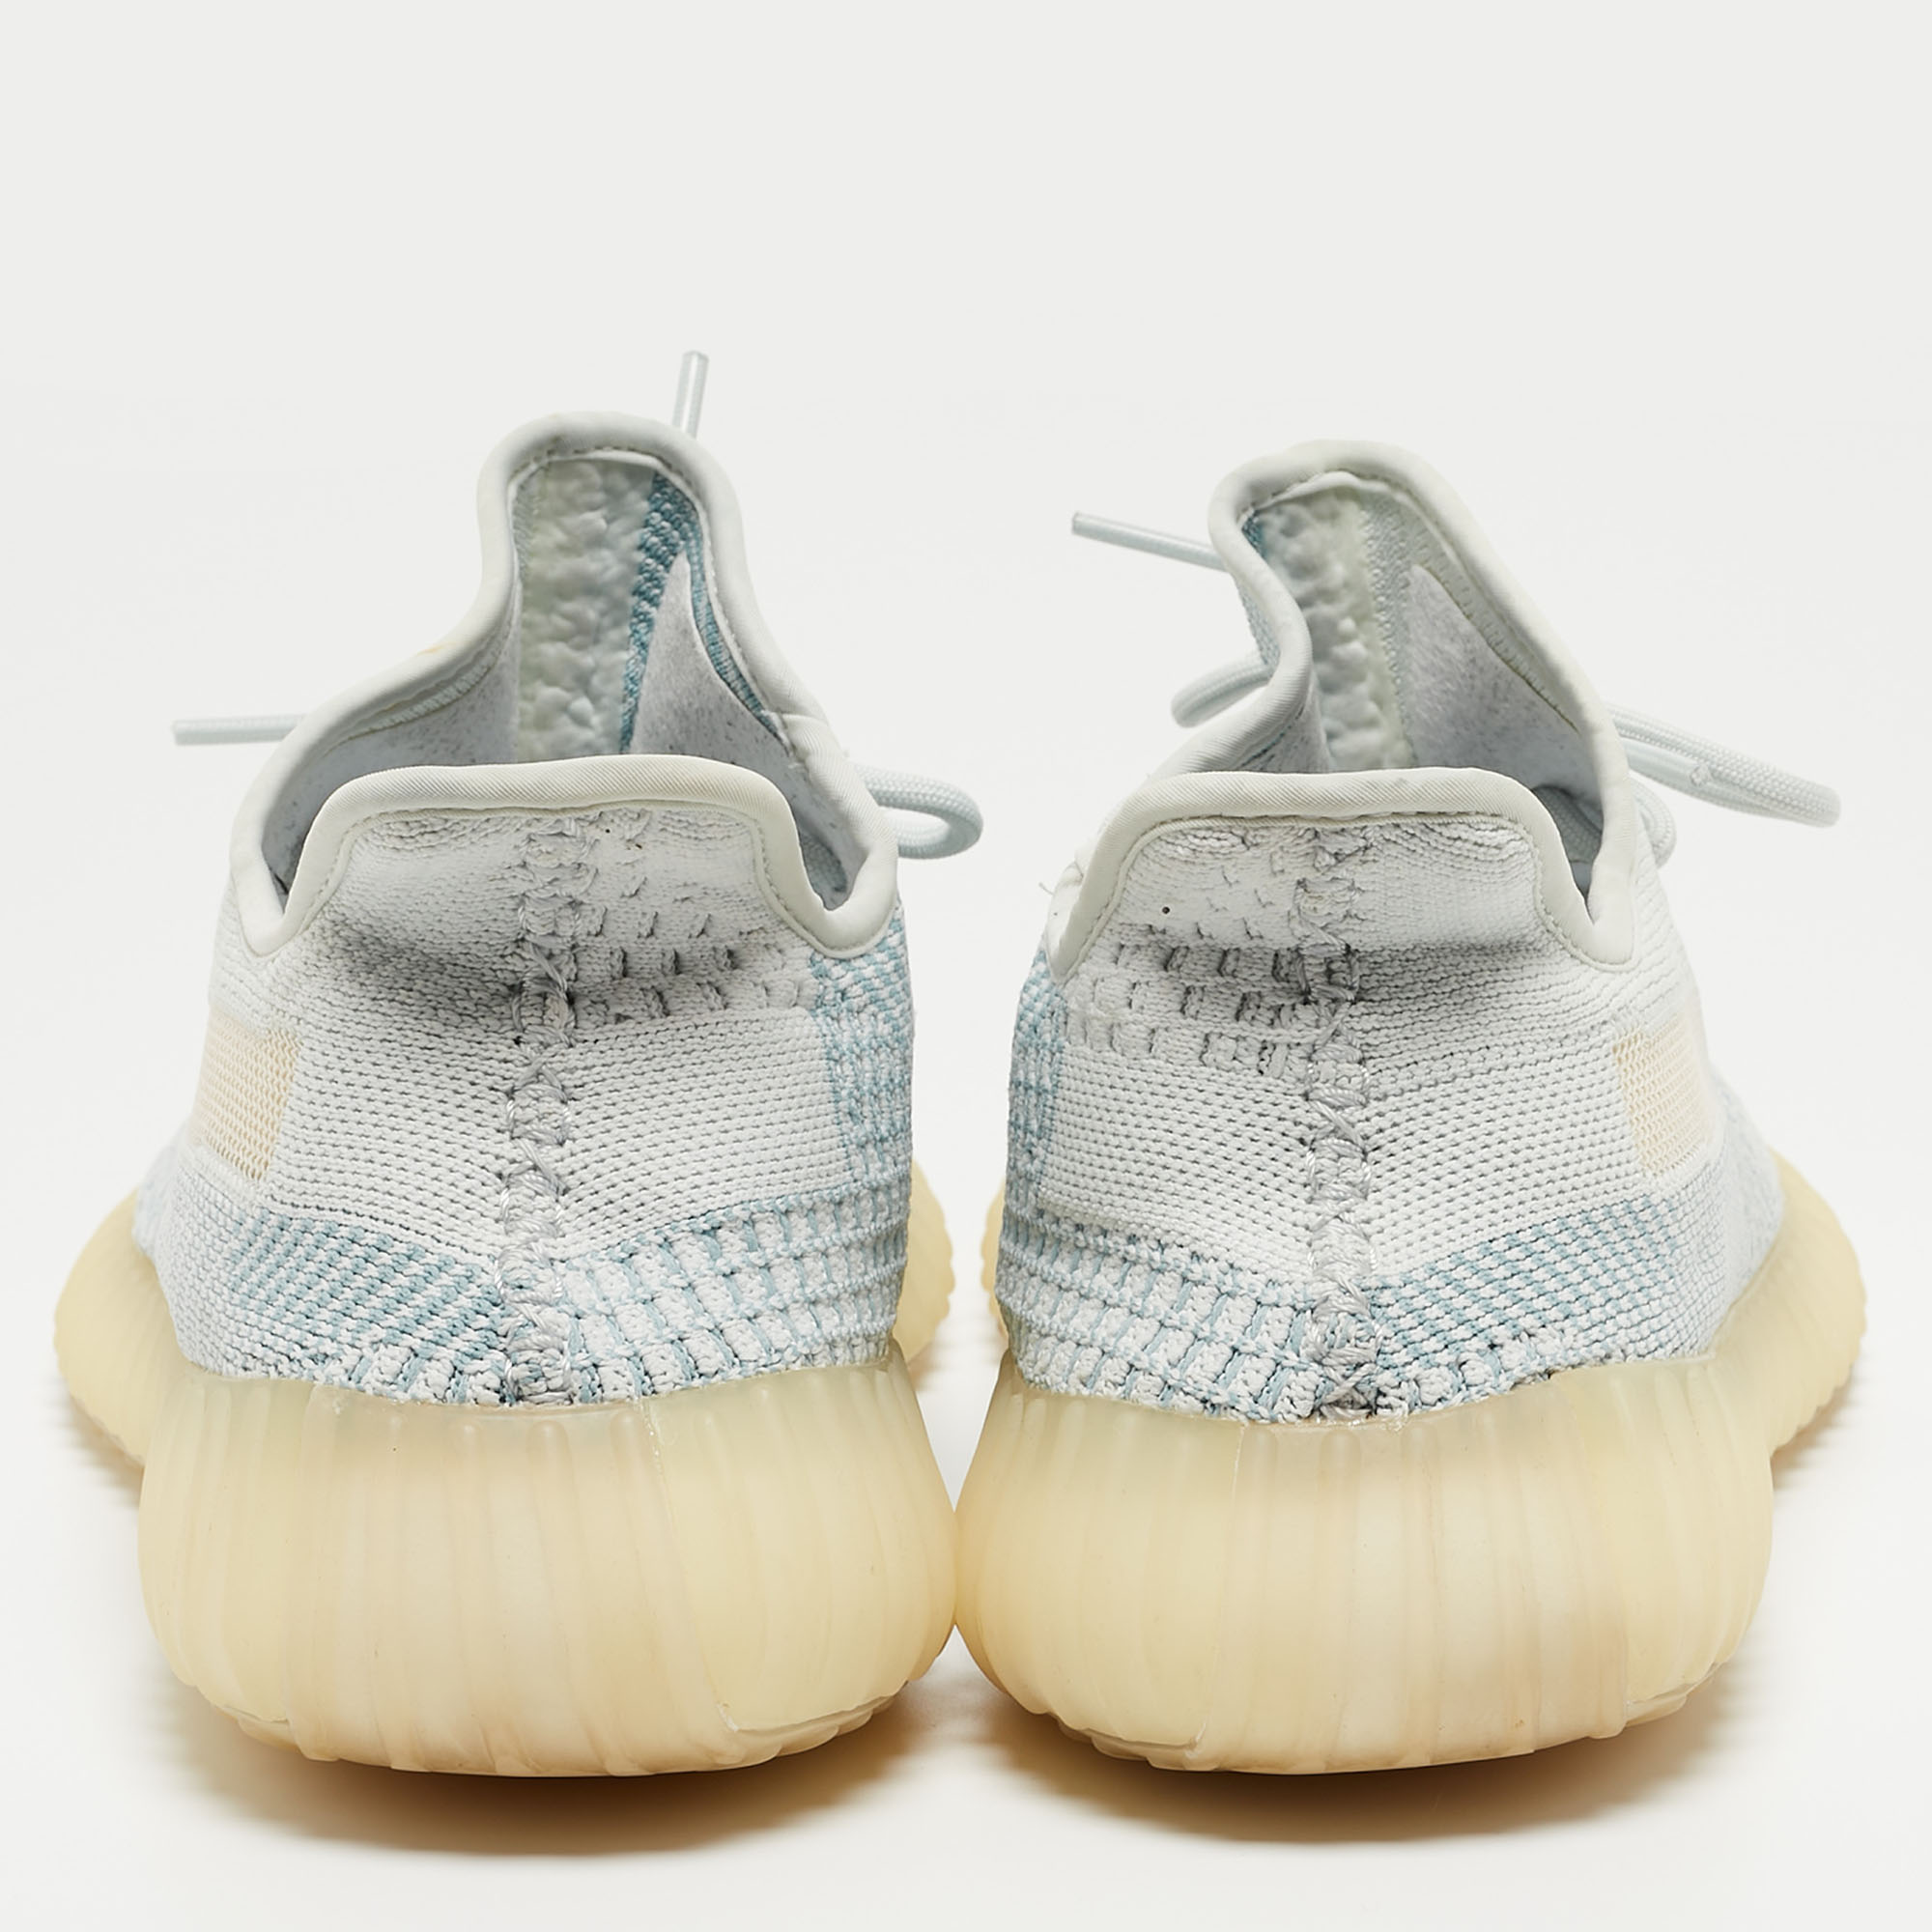 Yeezy X Adidas Blue/White Knit Fabric Boost 350 V2 Cloud White Non Reflective Sneakers Size 45 1/3